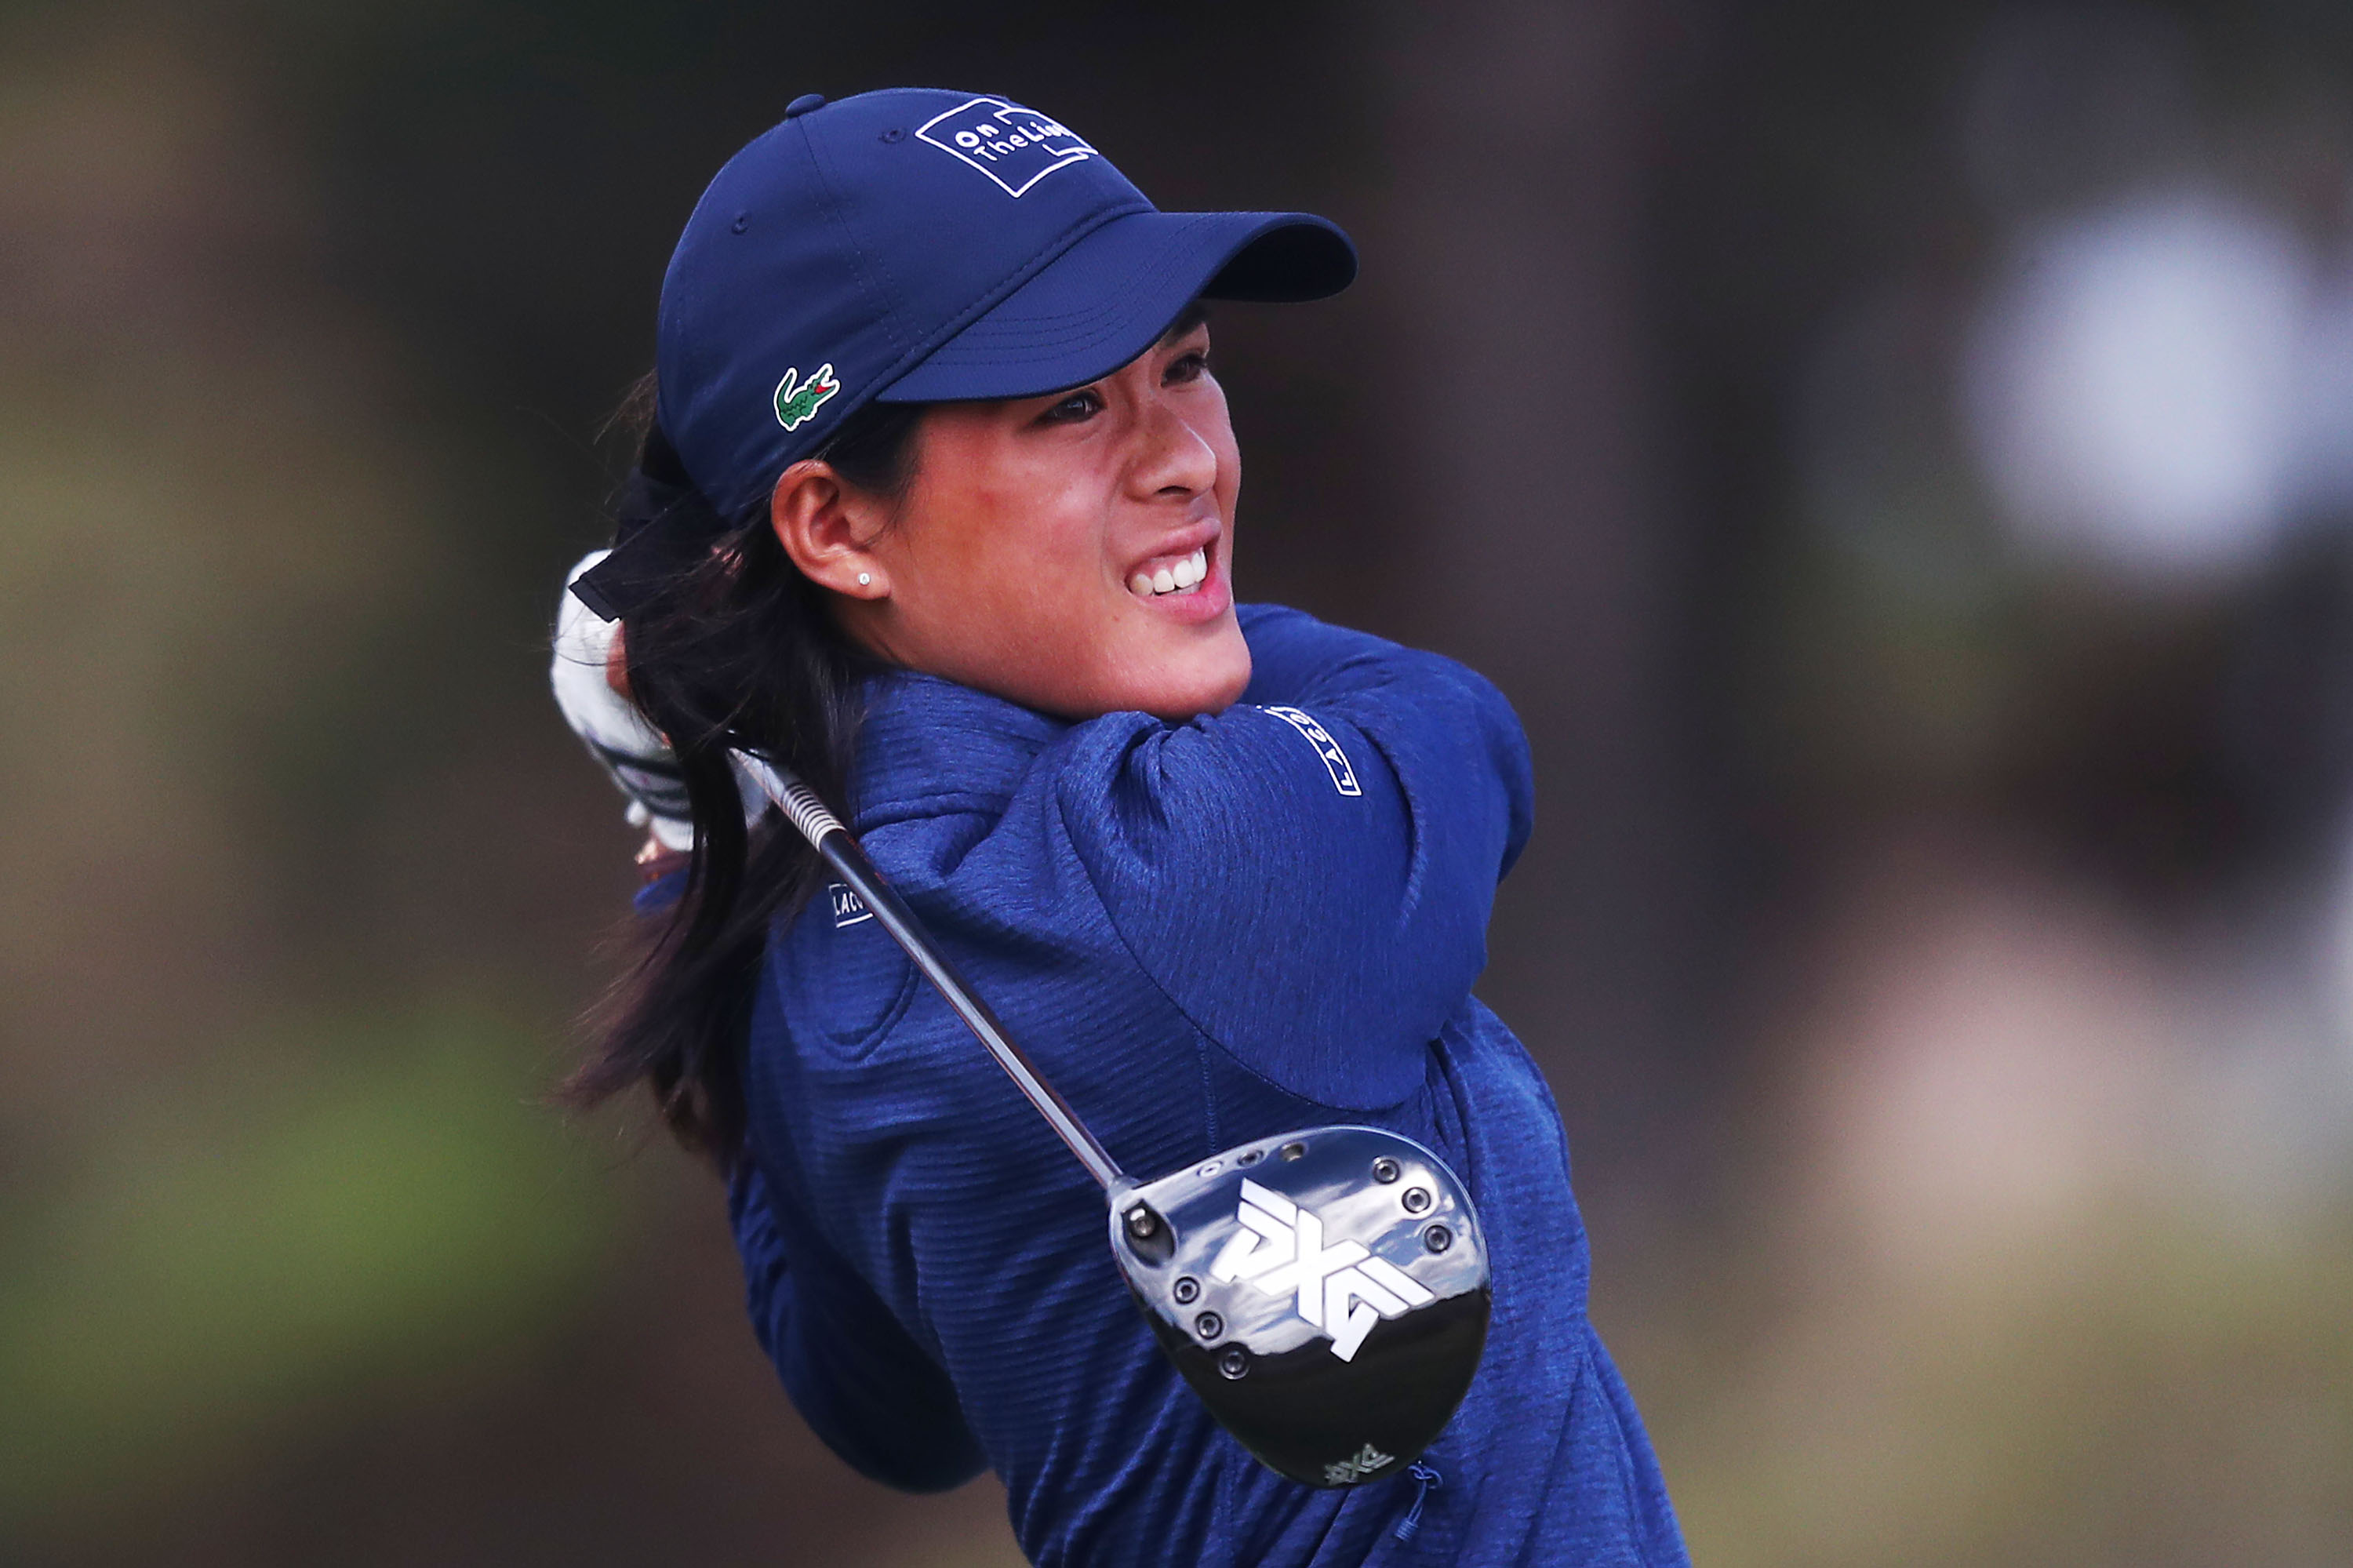 The clubs Celine Boutier used to win the ISPS Handa Vic Open